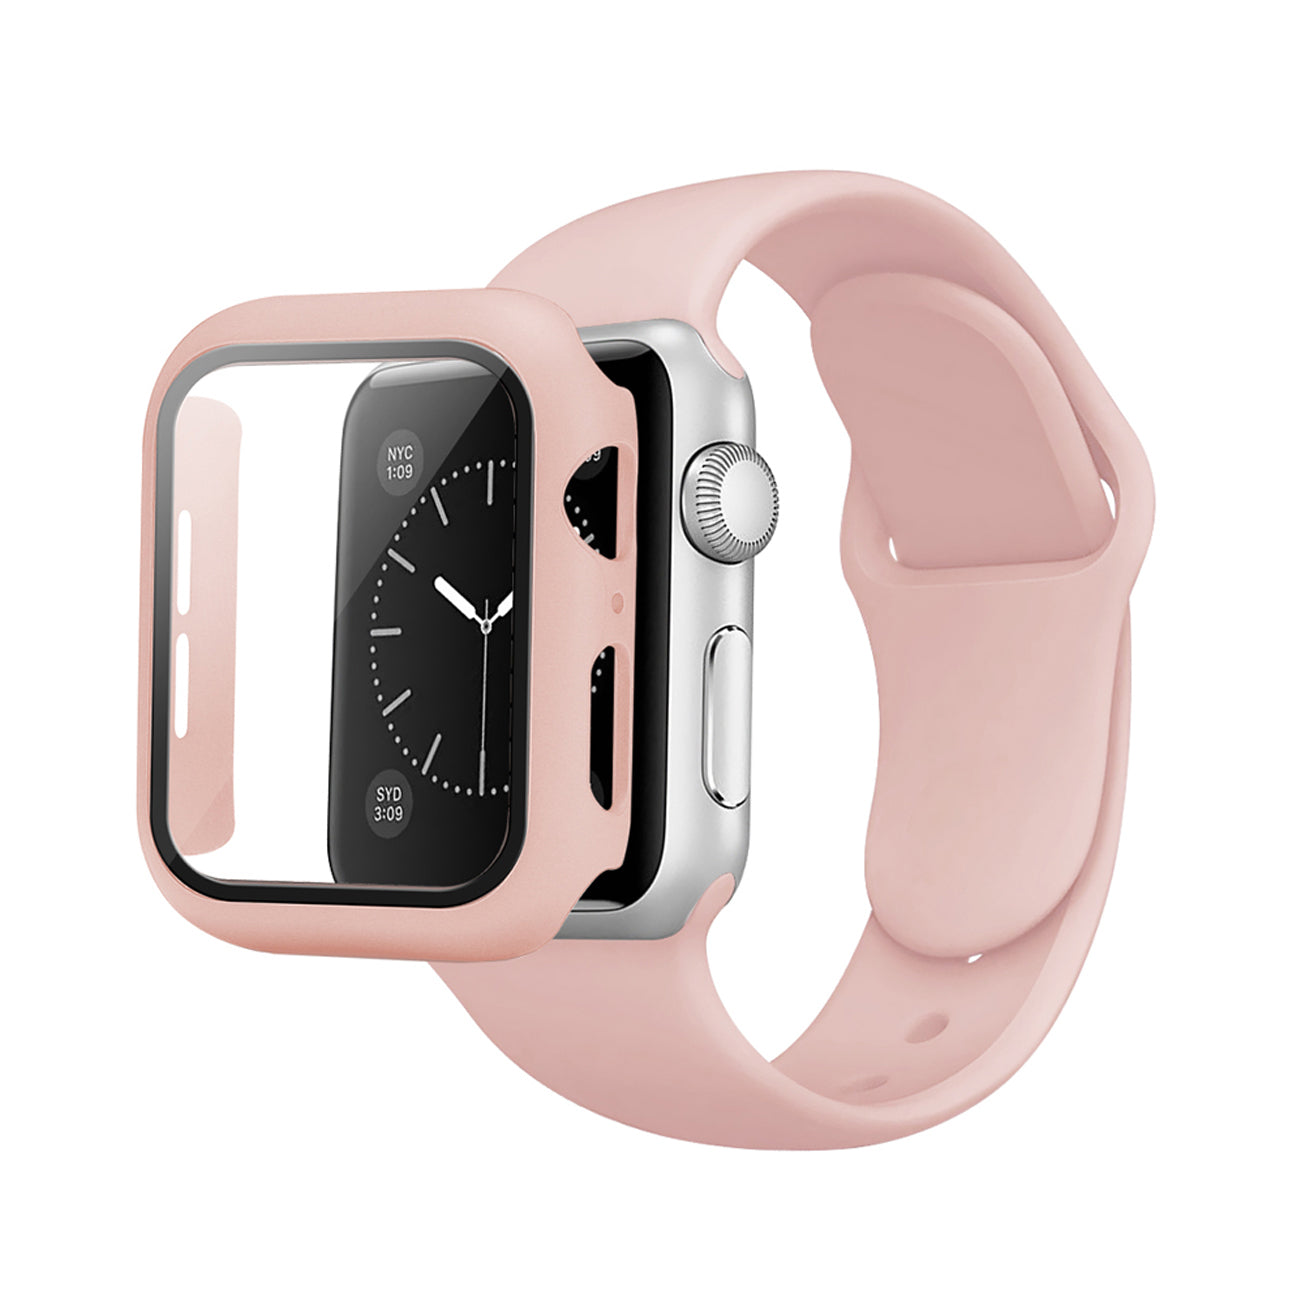 Watch Case PC With Glass Screen Protector, Silicone Watch Band Apple Watch 38mm Pink Color